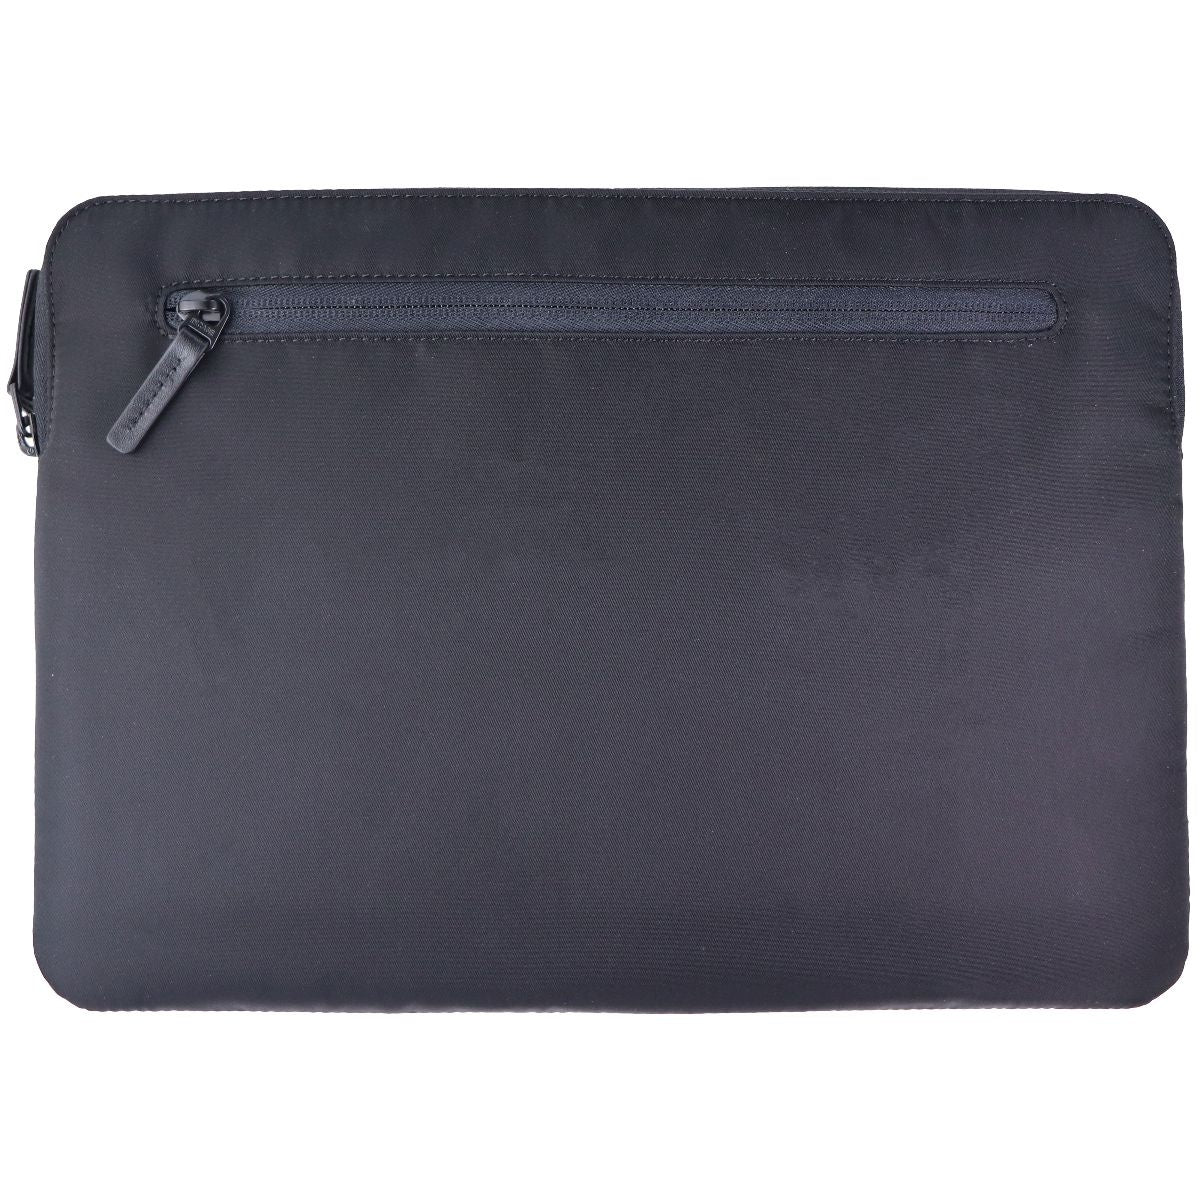 Incase Foam Padded Nylon Sleeve for Tablets + Laptops up to 13 inches - Black Computer Accessories - Laptop Cases & Bags Incase    - Simple Cell Bulk Wholesale Pricing - USA Seller